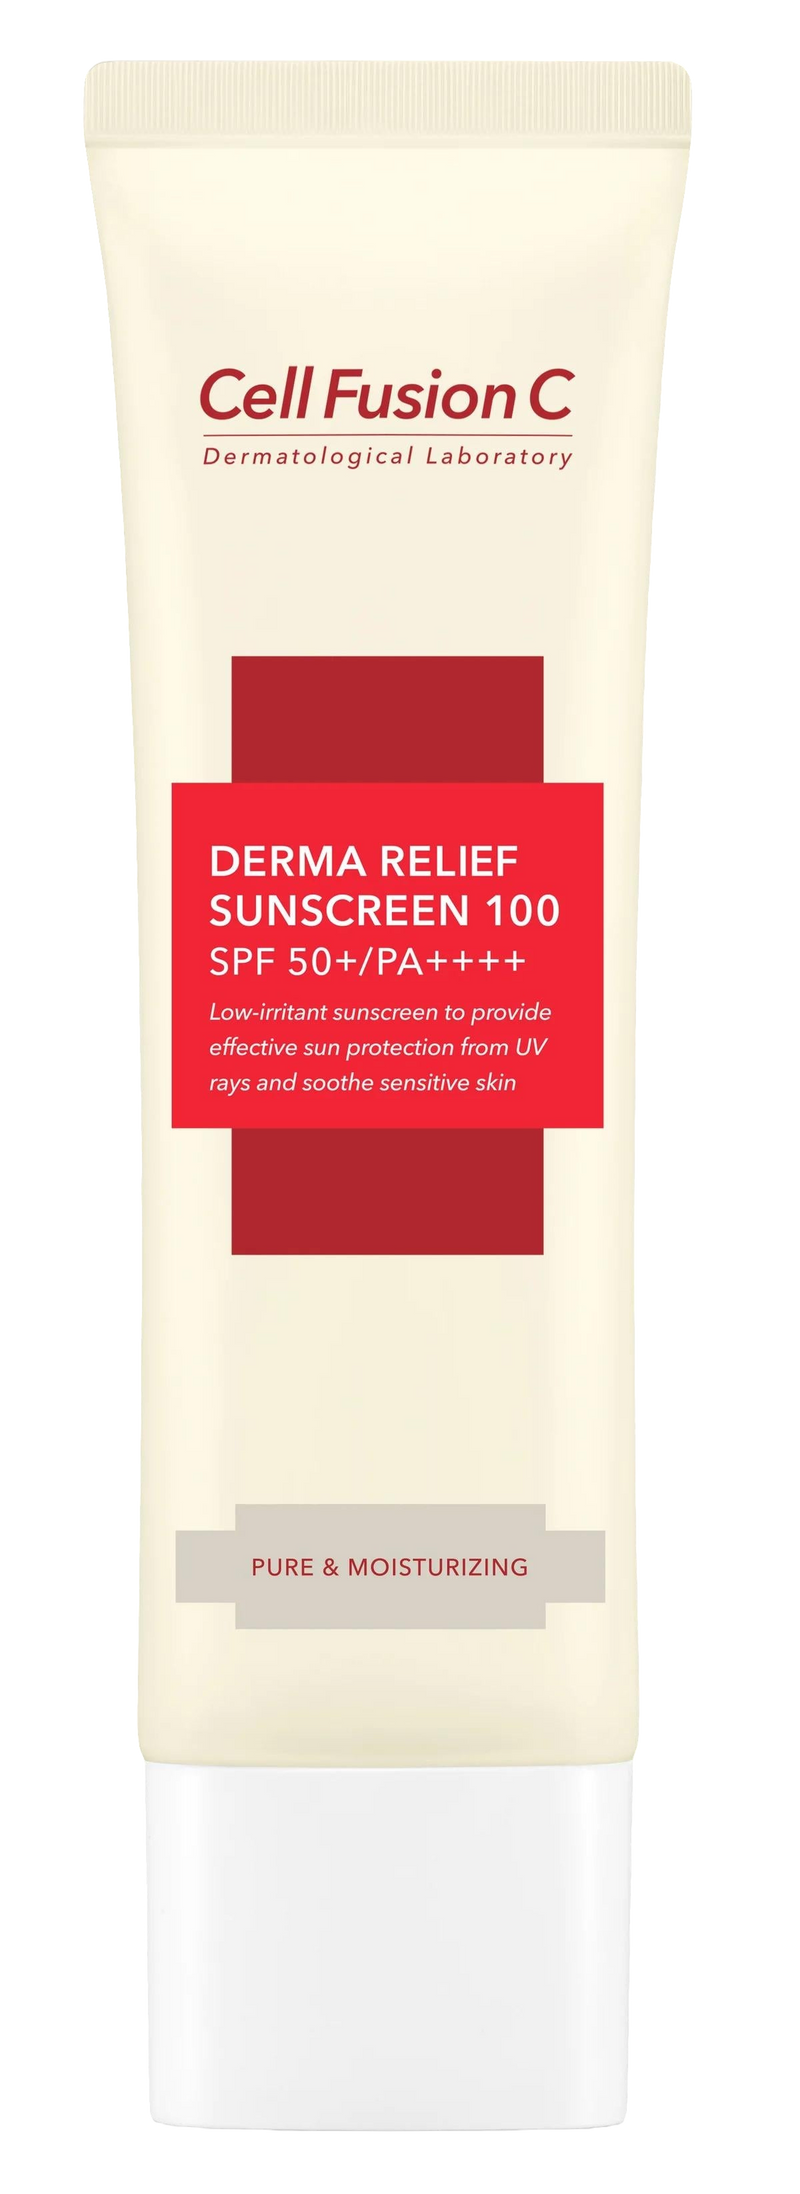 [CellFusionC] Derma Relief Sunscreen SPF50+ / PA++++ - 50ml-Luxiface.com